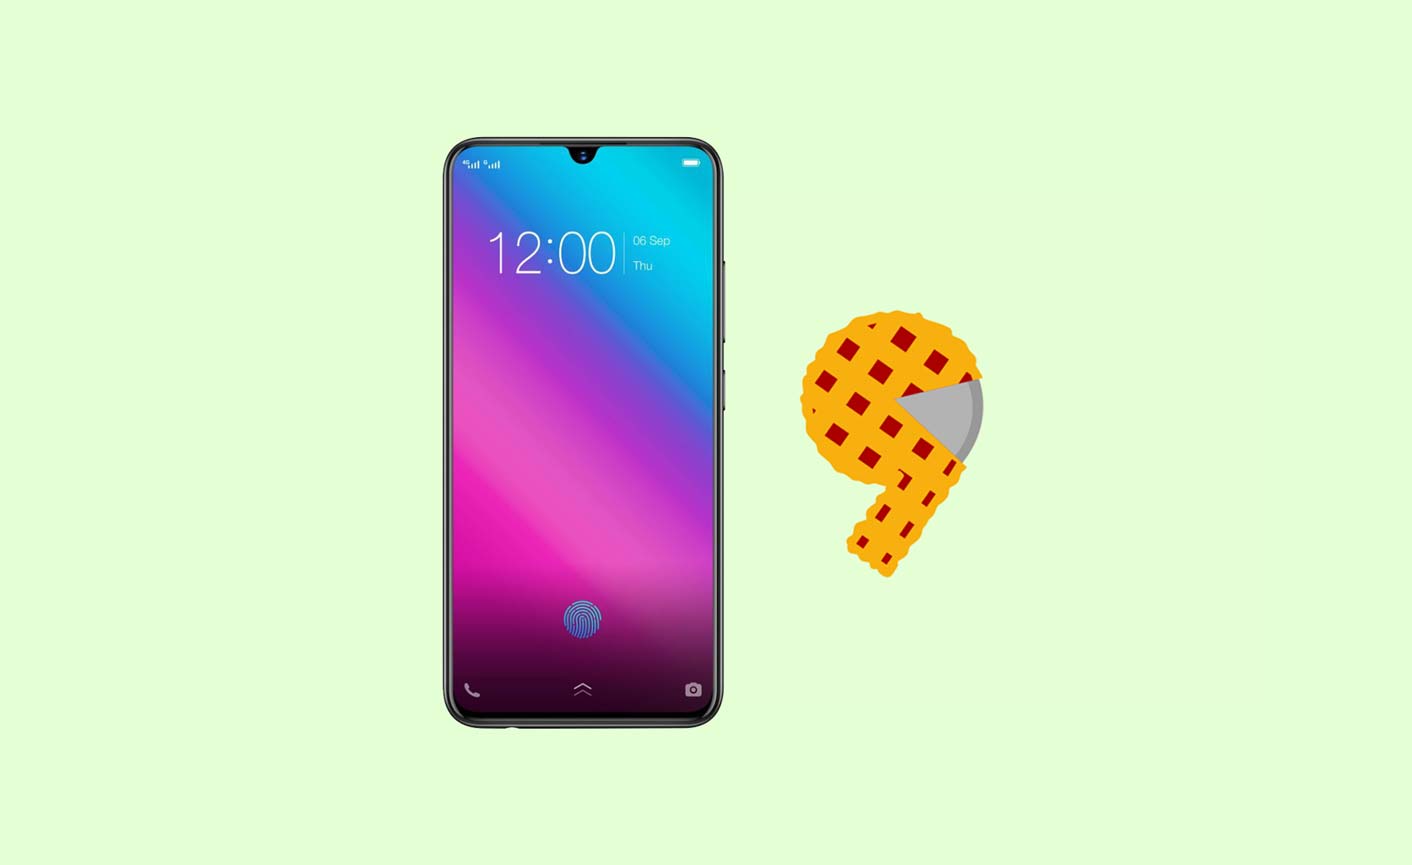 Download PD1814F_EX_A_6.10.1: Android Pie for Vivo V11 Pro